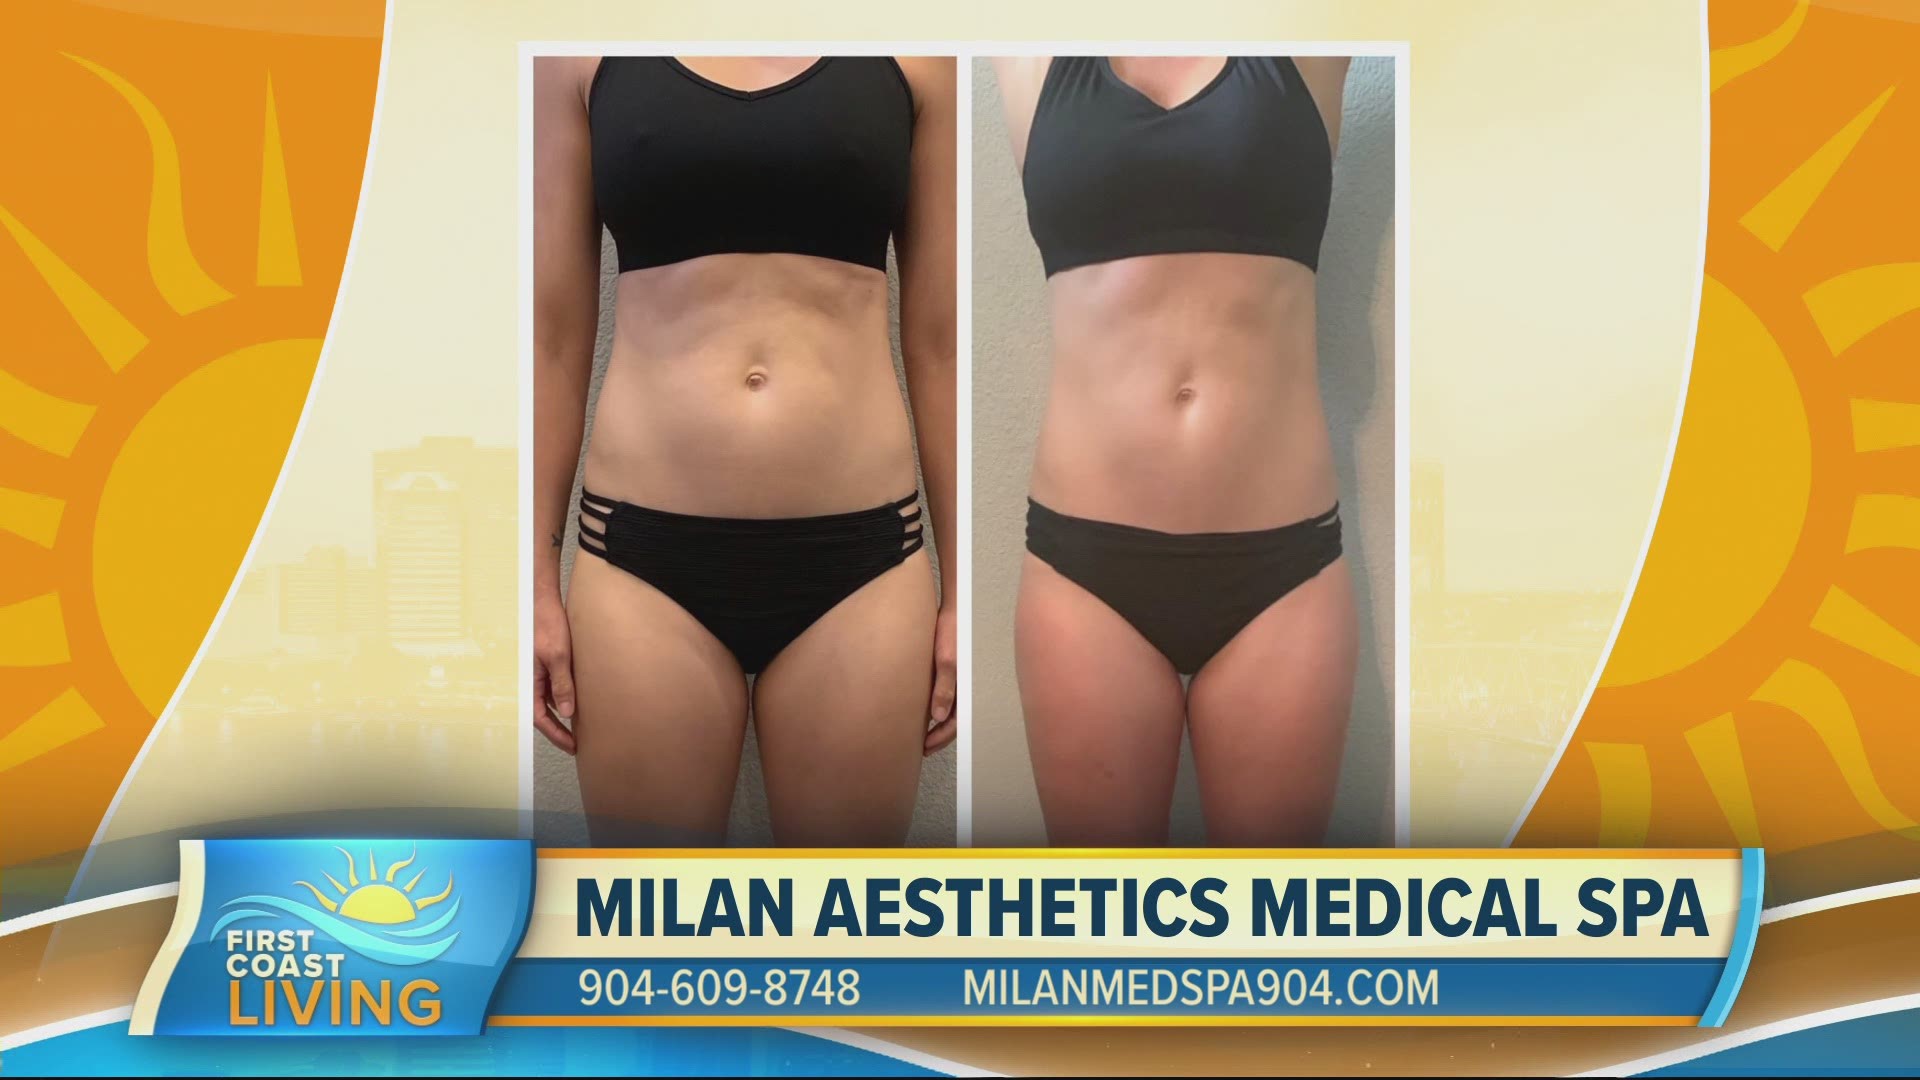 See how the full body laser lipo bed could help you with your goals.